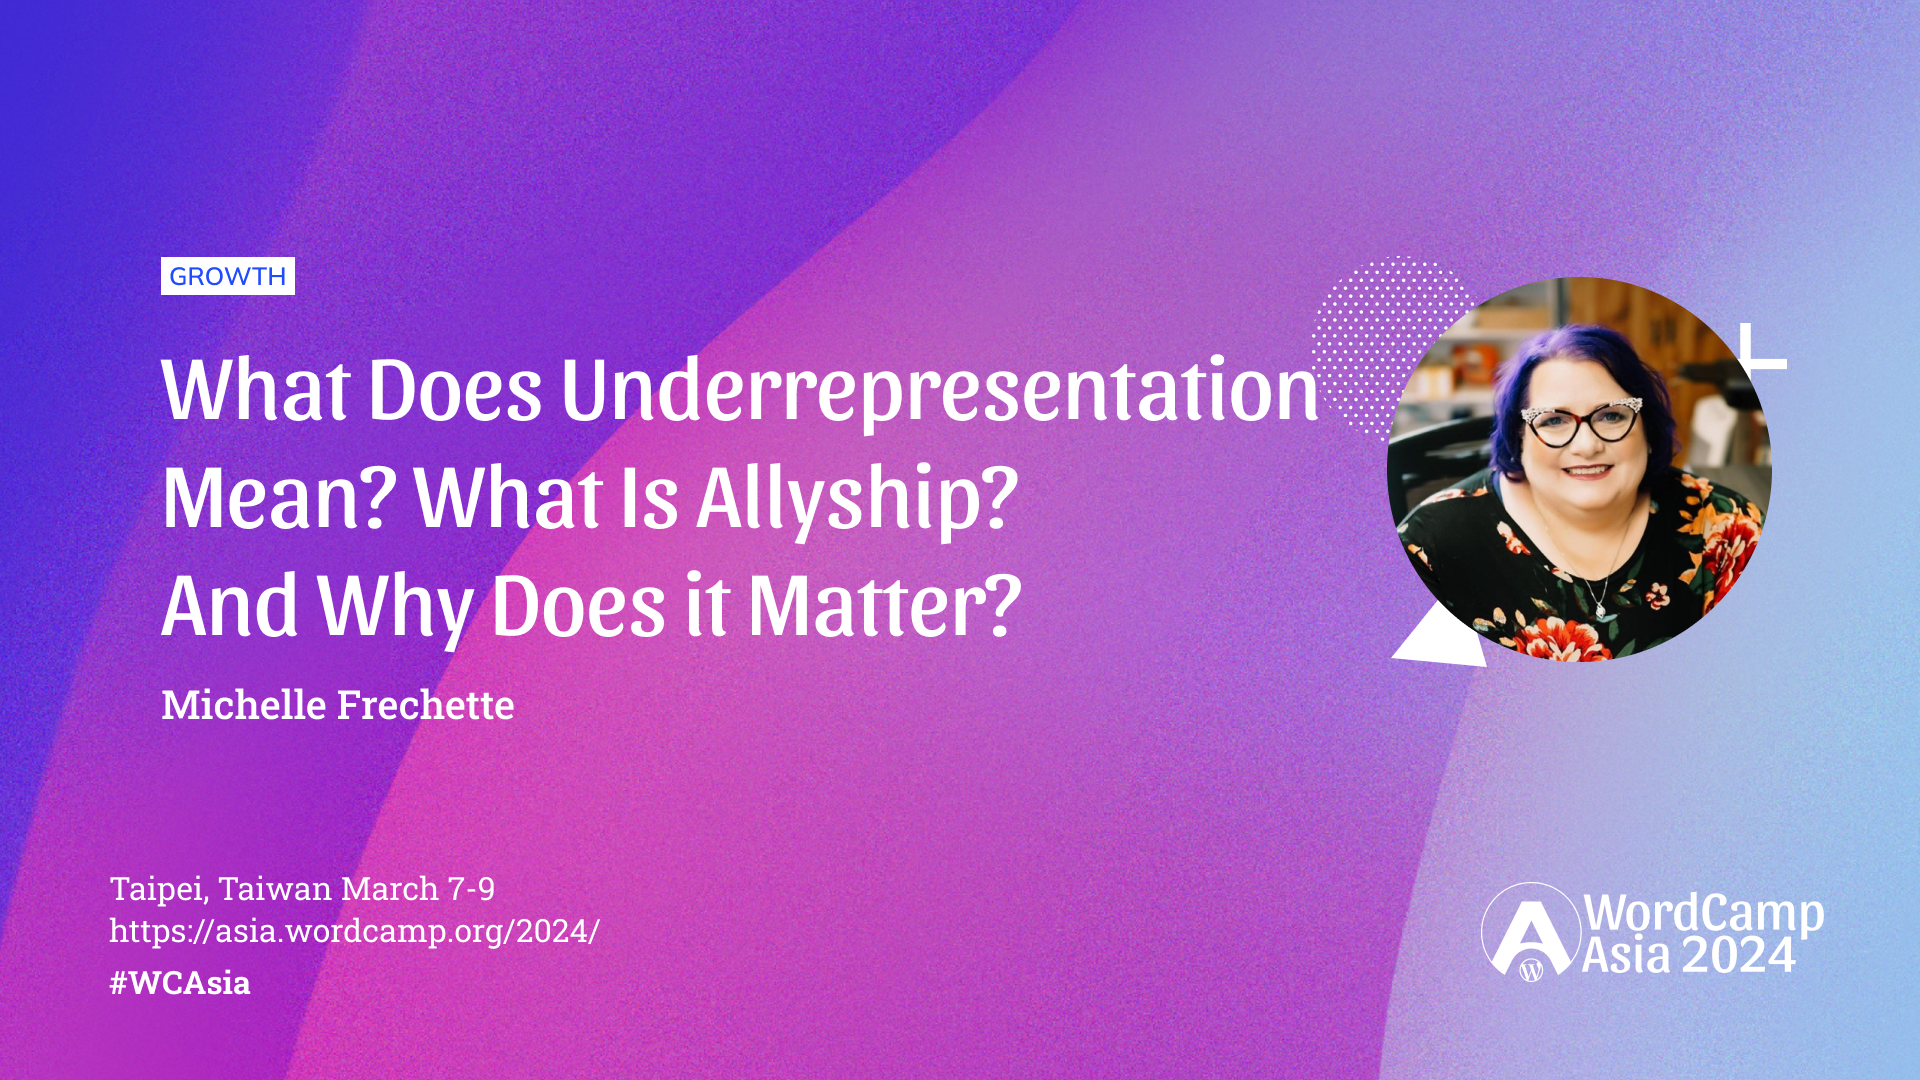 What Does Underrepresentation Mean? What Is Allyship? And Why Does it Matter?